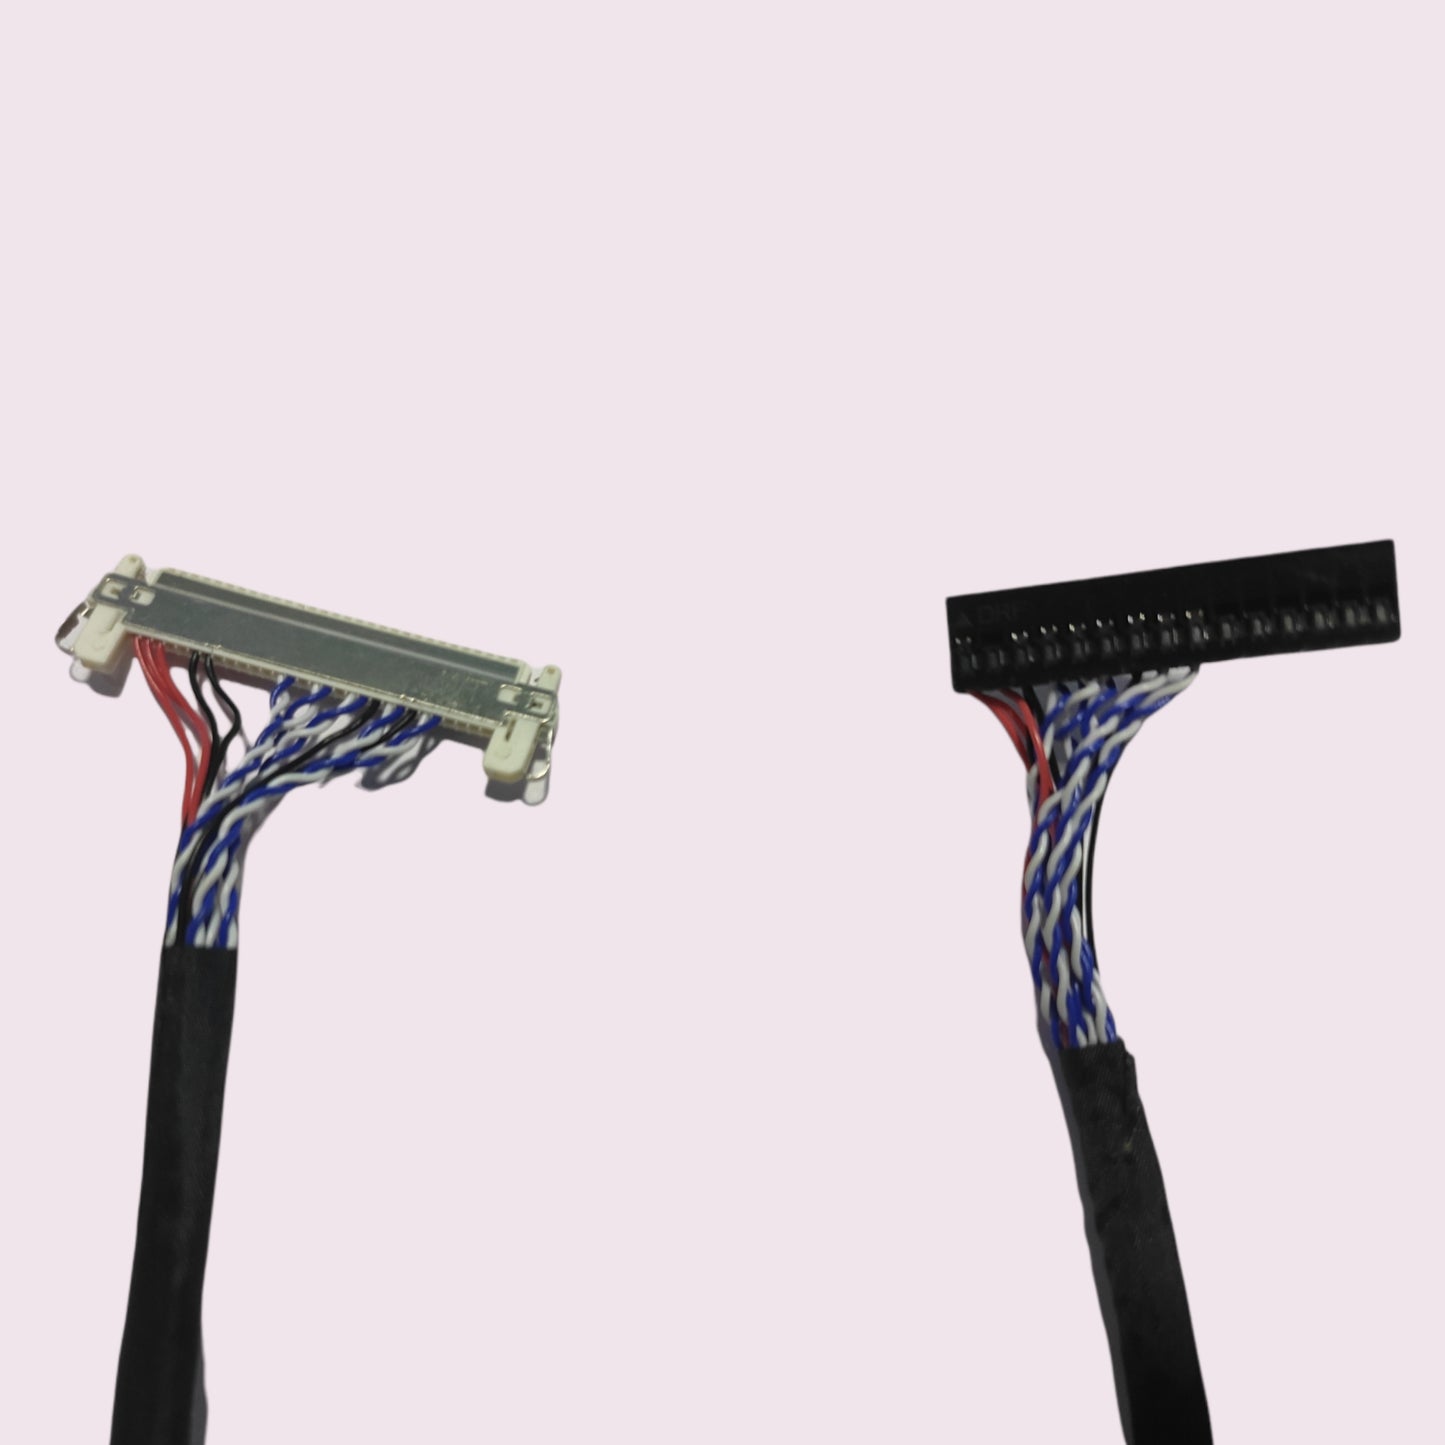 LVDS Cable 04